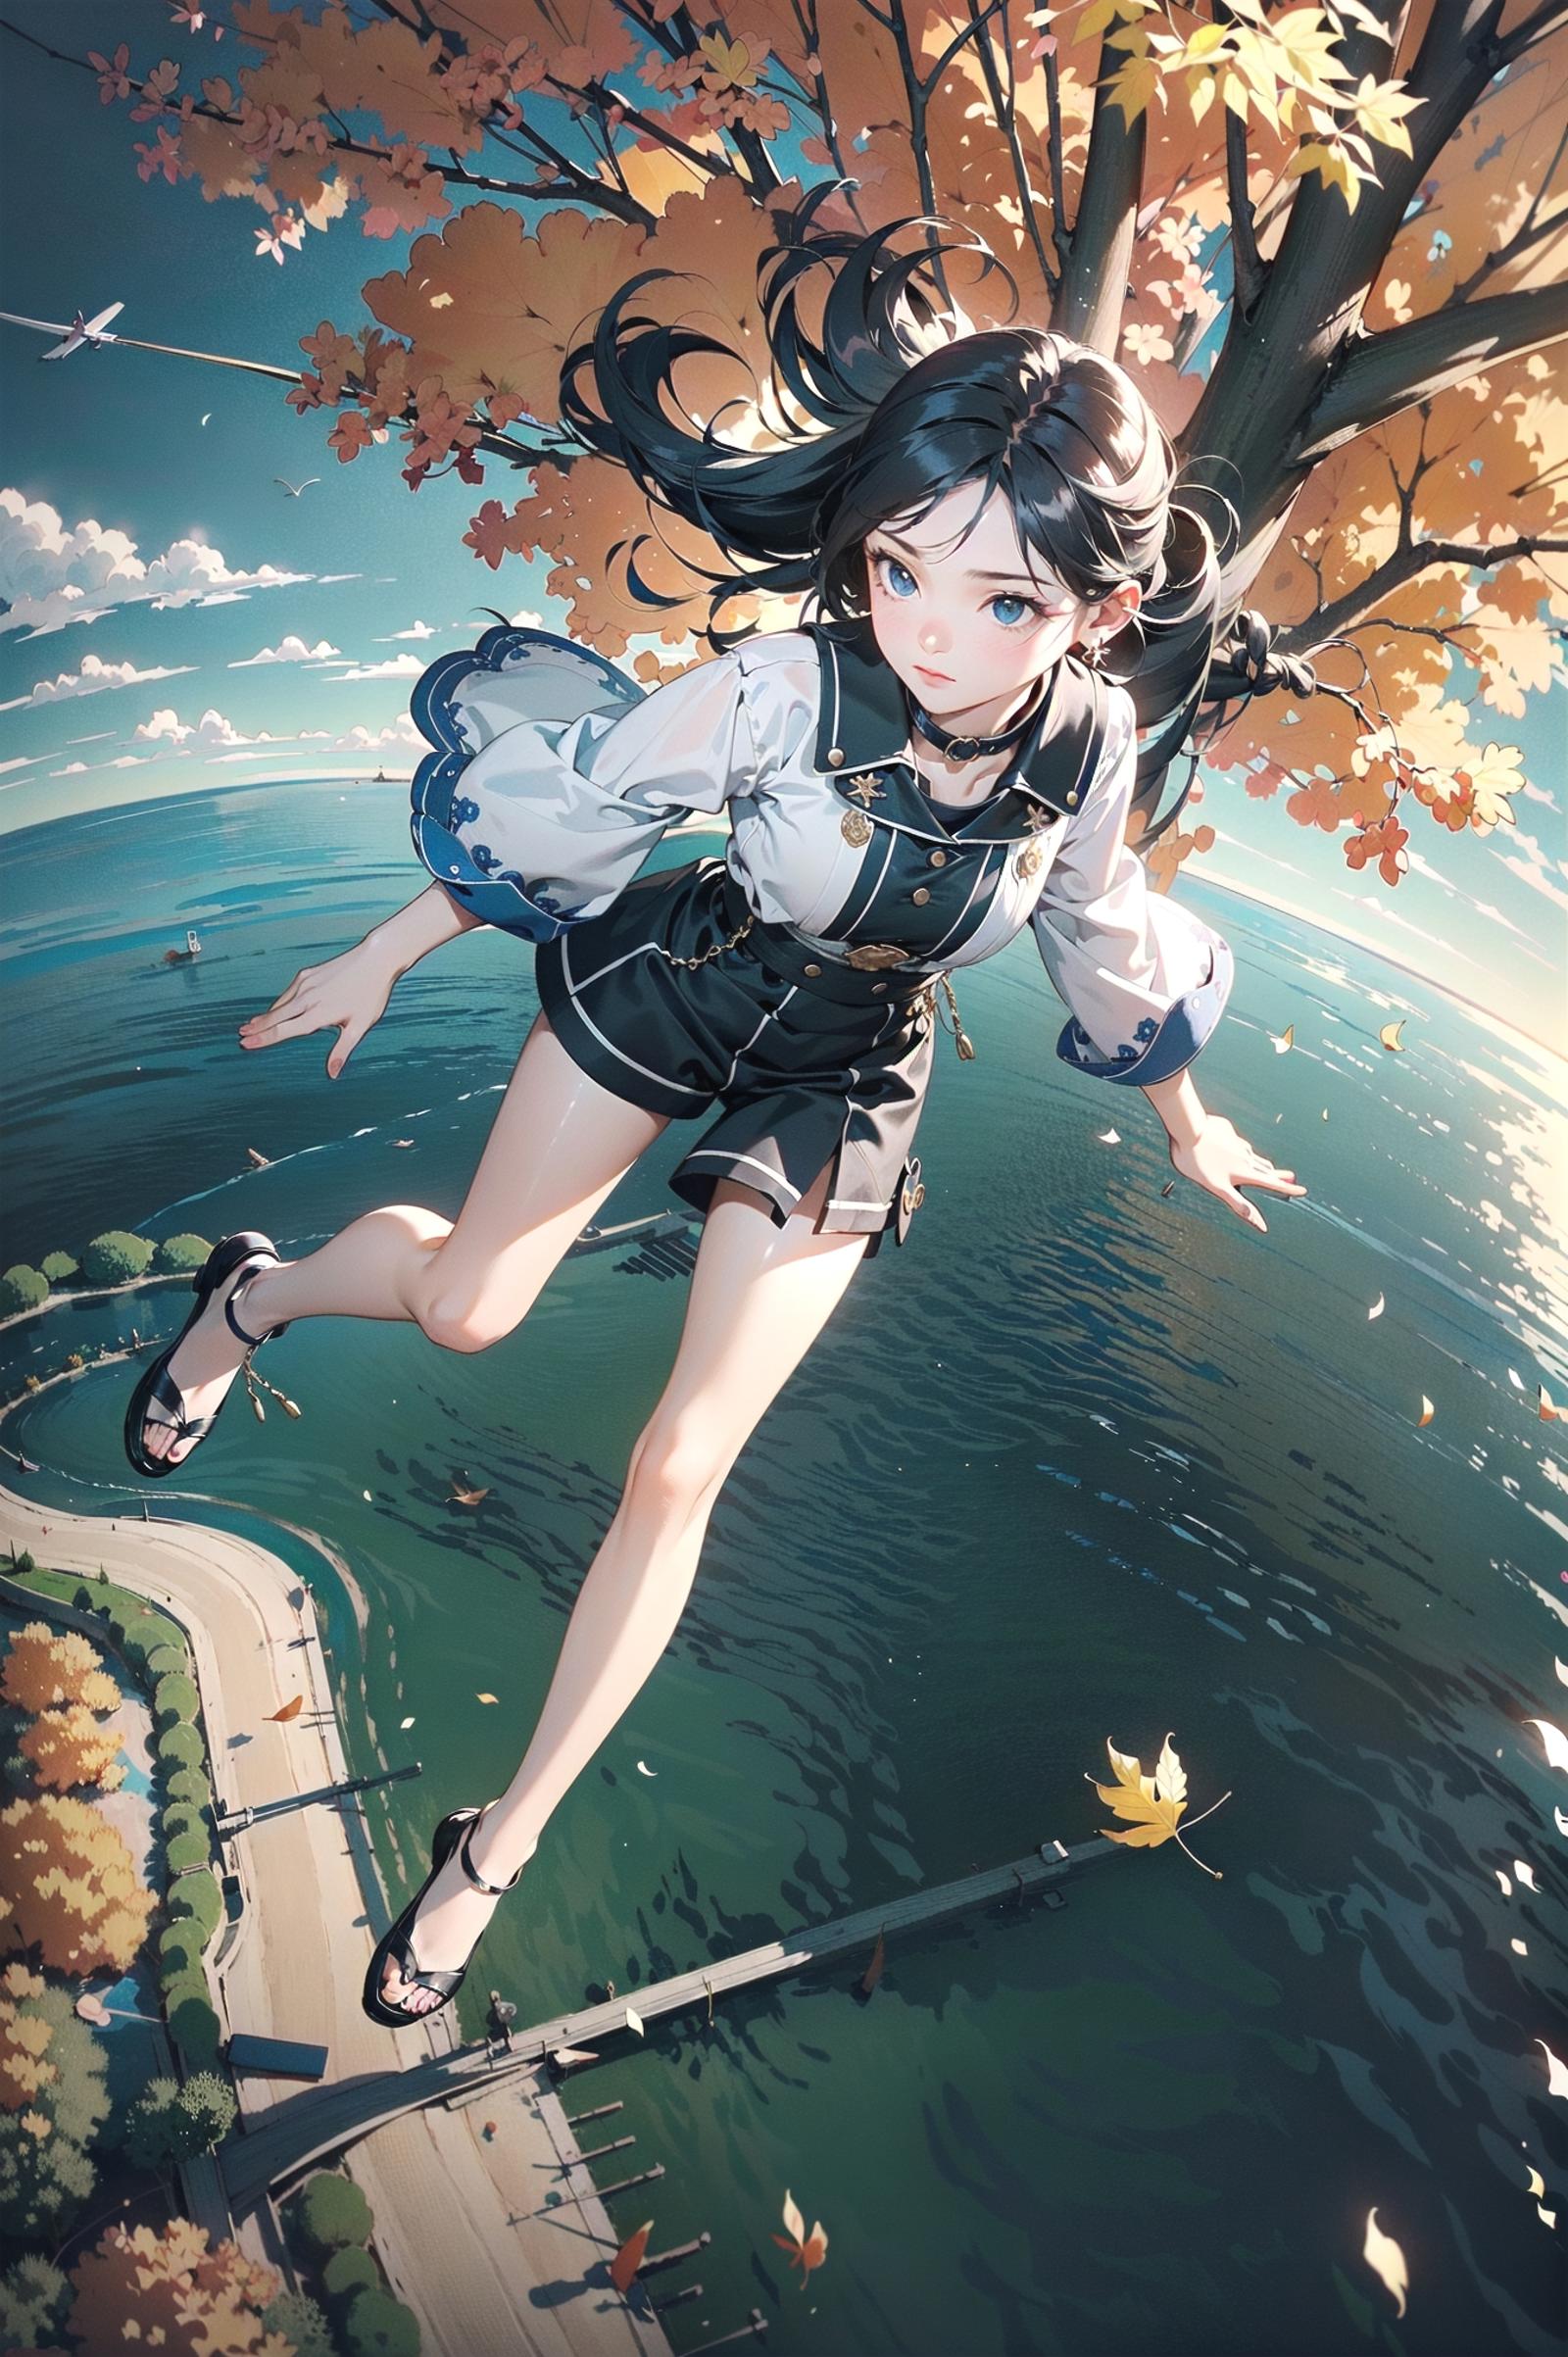 Anime Art of a Girl Flying in the Air with a Tree in the Background